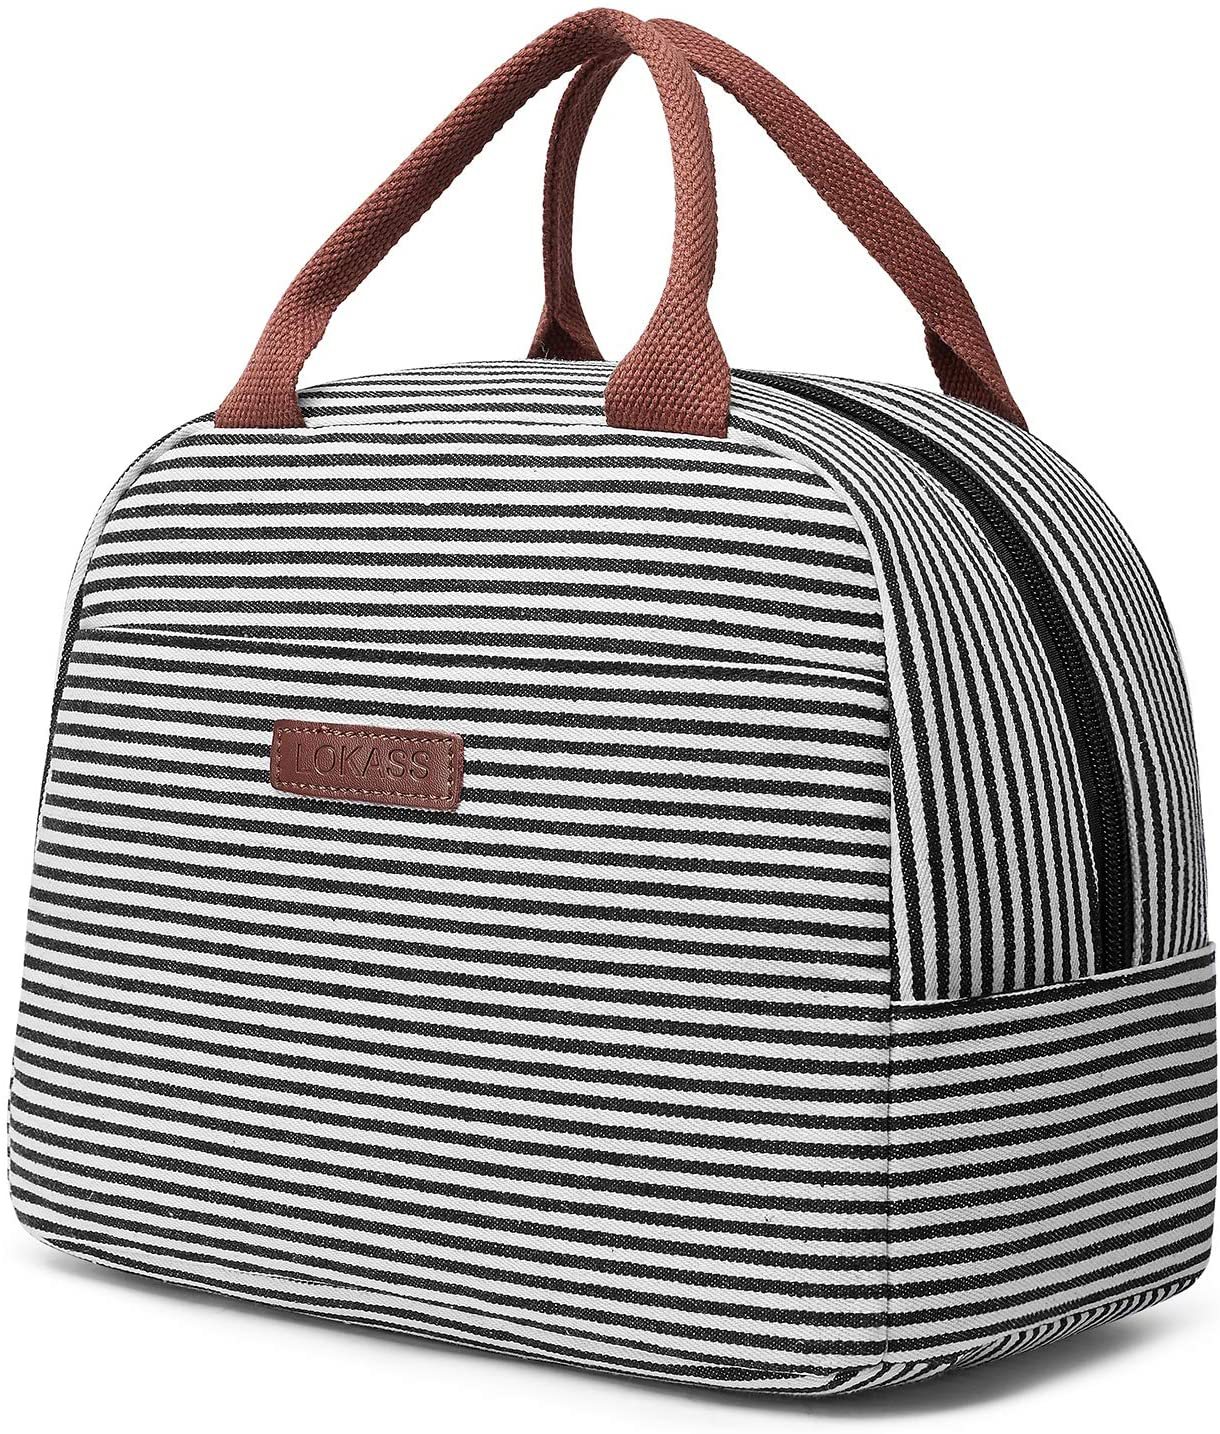 LOKASS Lunch Bag Cooler Bag Women Tote Bag Insulated Lunch Box Water-resistant Thermal Lunch Bag Soft Leak Proof Liner Lunch Bags for women/Picnic/Boating/Beach/Fishing/Work (White)